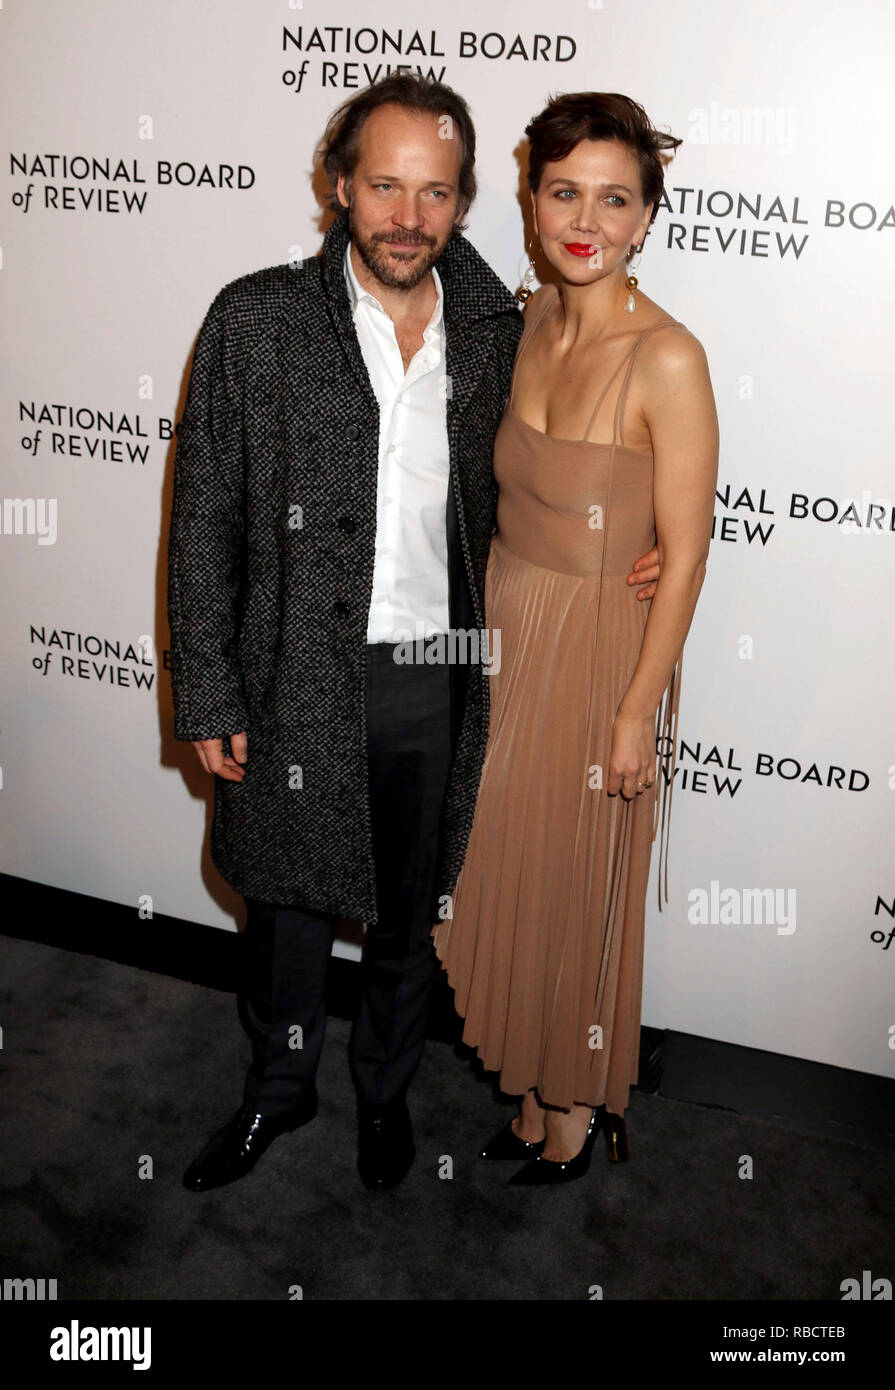 New York City, New York, USA. 8th Jan, 2019. Actress MAGGIE GYLLENHAAL and her husband/actor PETER SARSGAARD attend the 2019 National Board of Review Annual Awards Gala held at Cipriani 42nd Street. Credit: Nancy Kaszerman/ZUMA Wire/Alamy Live News Stock Photo